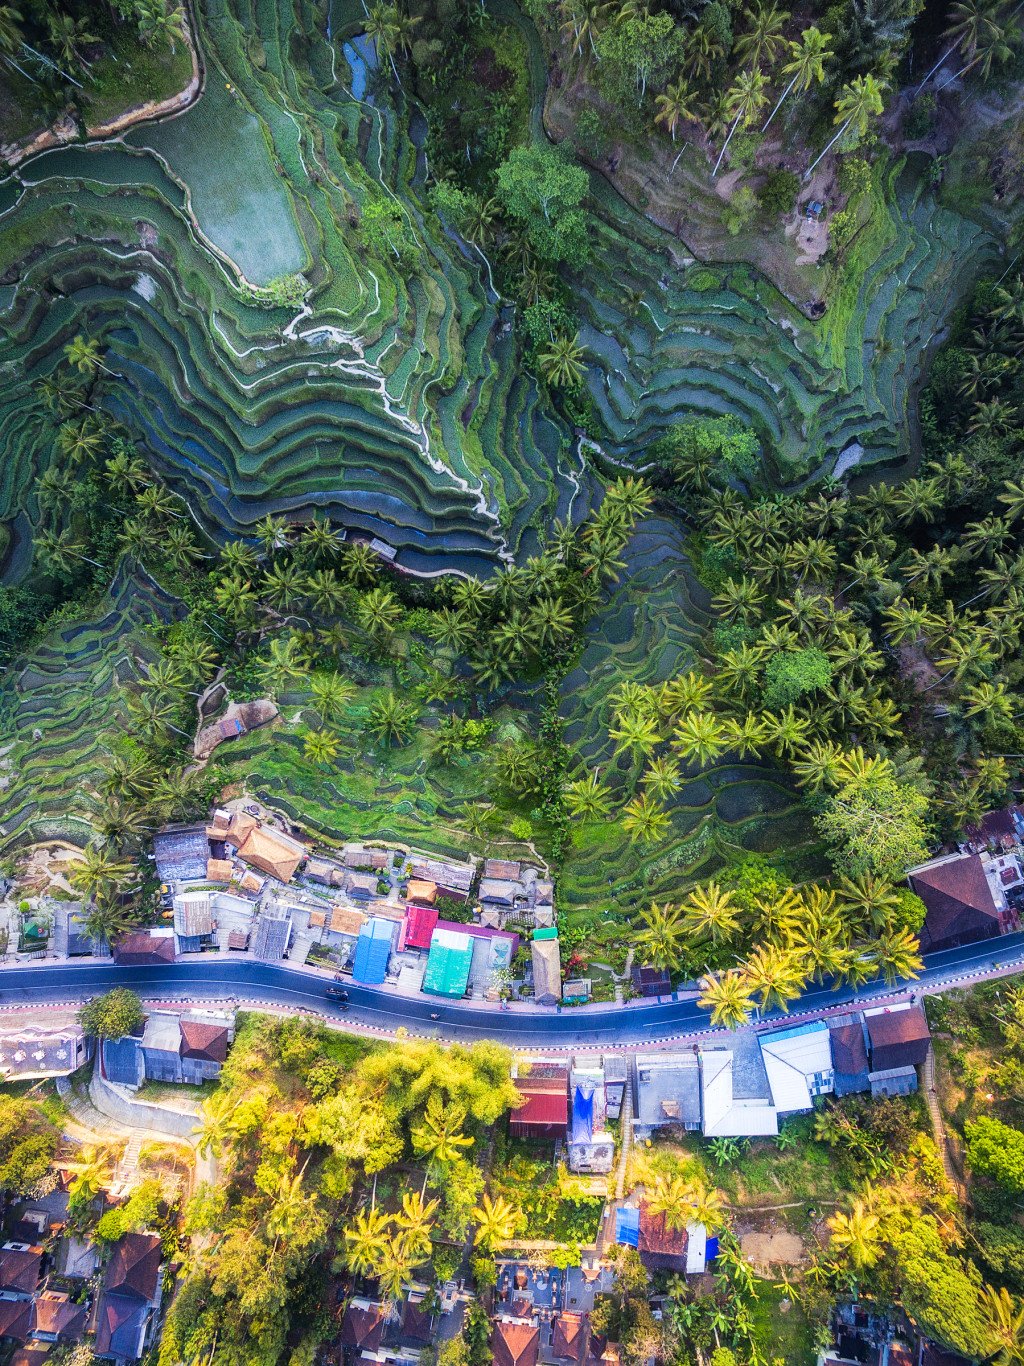 Indonesia Tegalalang Rice Terraces near Ubud by drone by Michael Matti